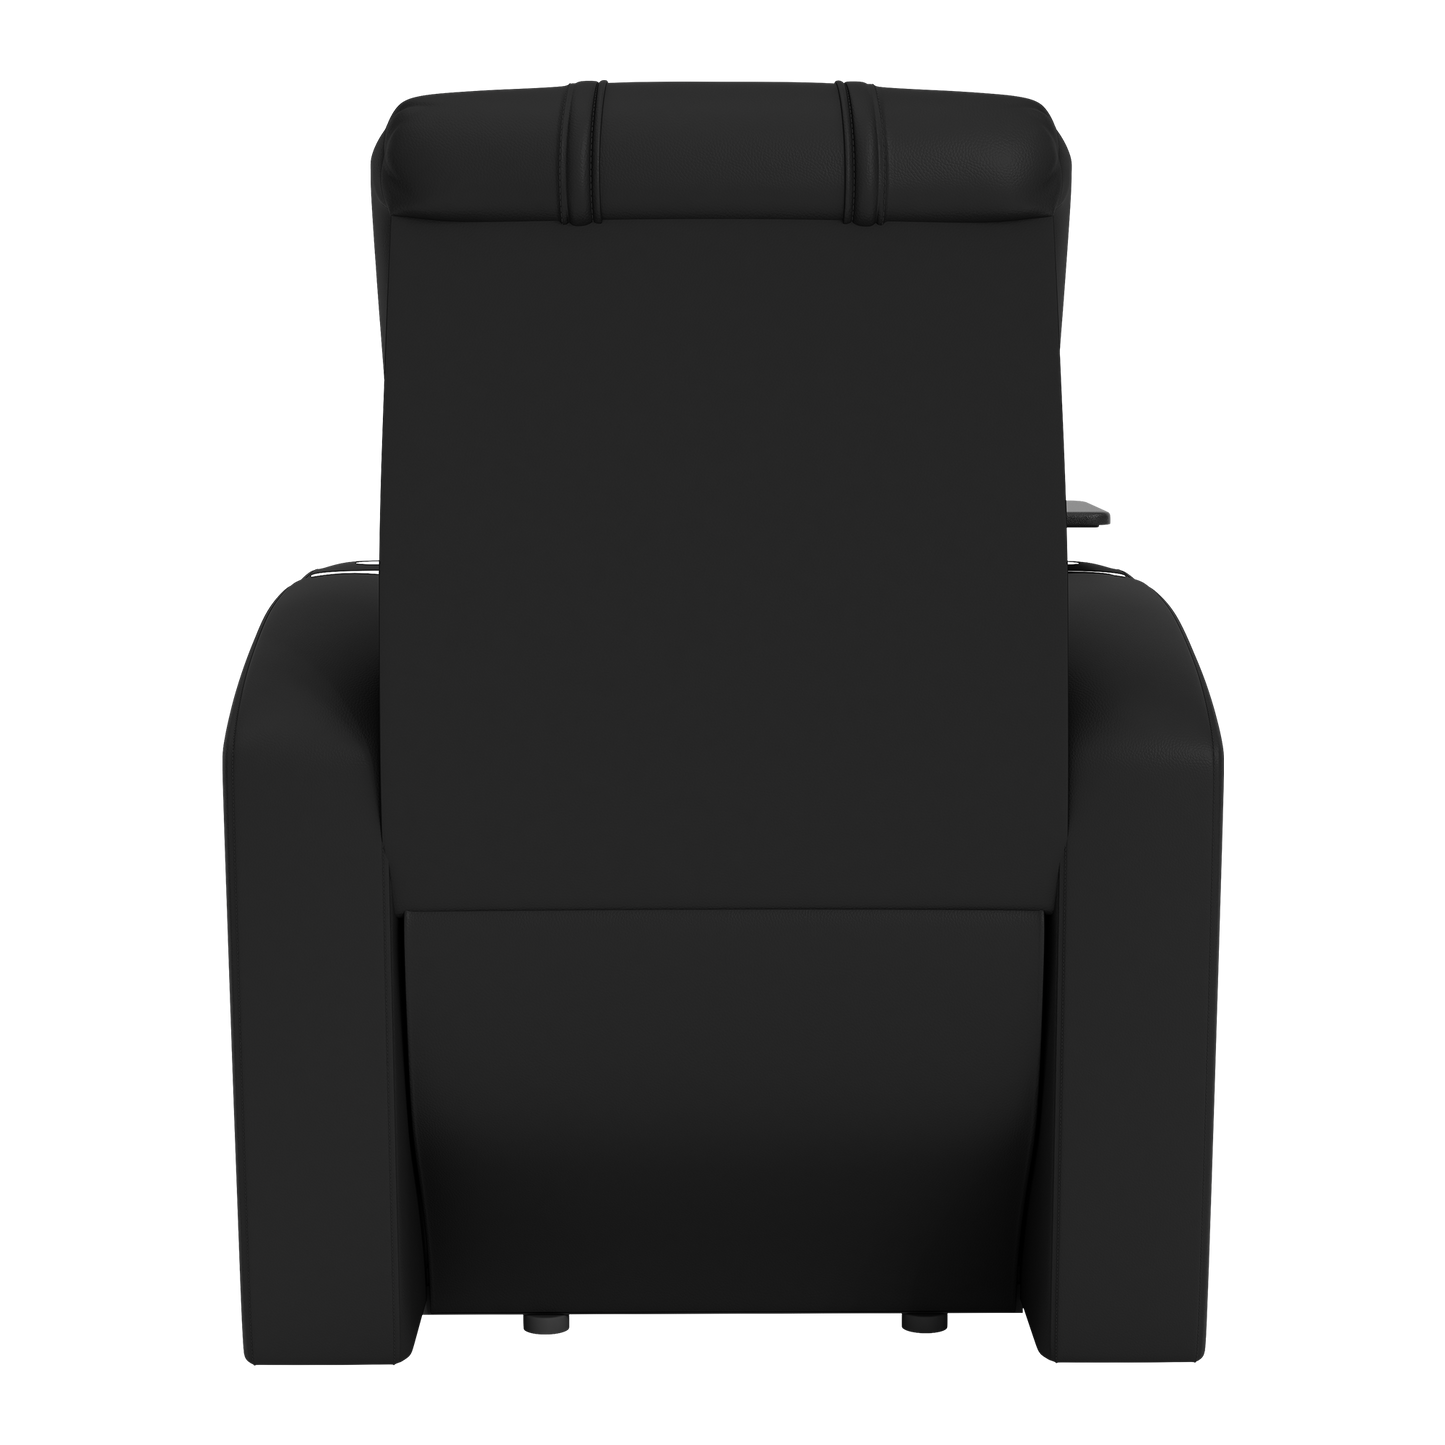 Stealth Power Plus Recliner with Pittsburgh Pirates Logo